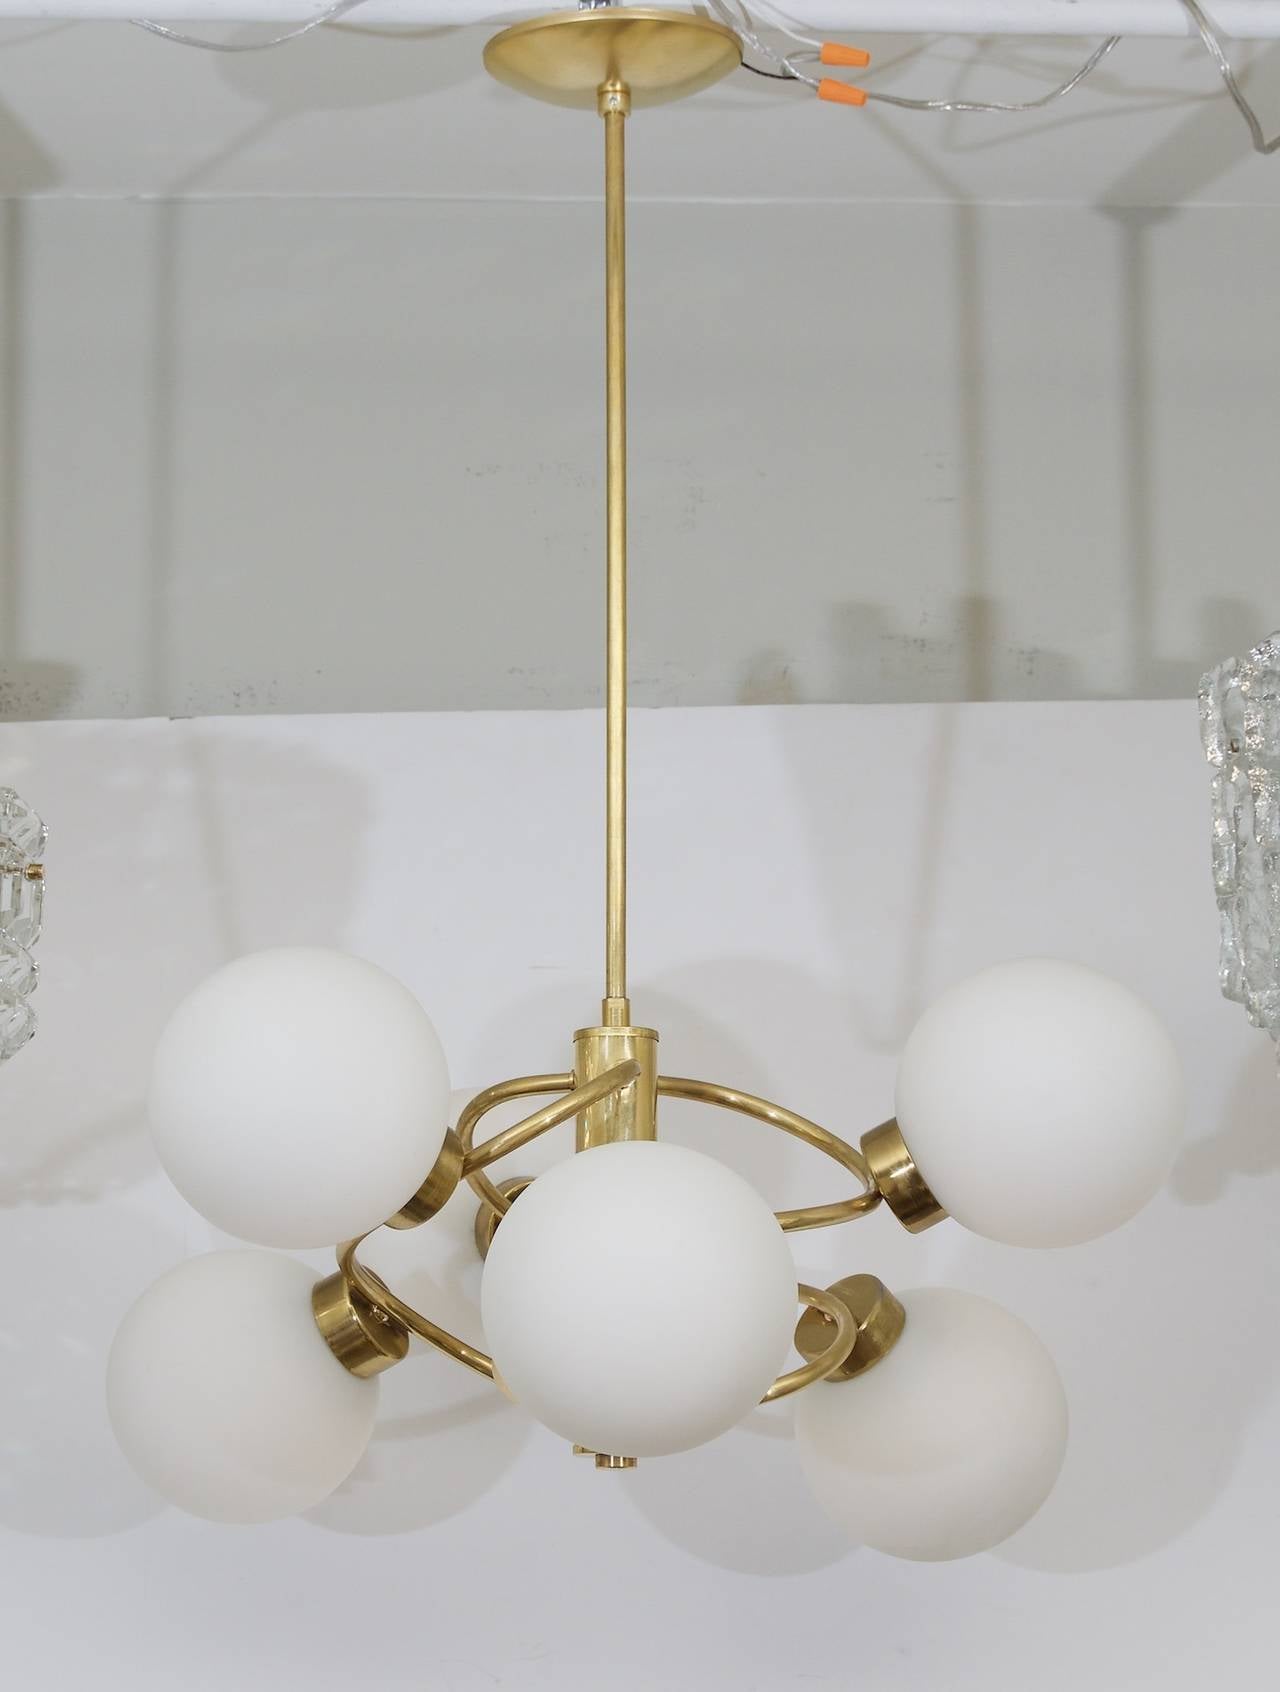 Spectacular six-arm chandelier with opal glass globes. Brass body. A wonderful addition to all decors. 

Six E14 base bulbs up to 40 watts per bulb, new wiring.